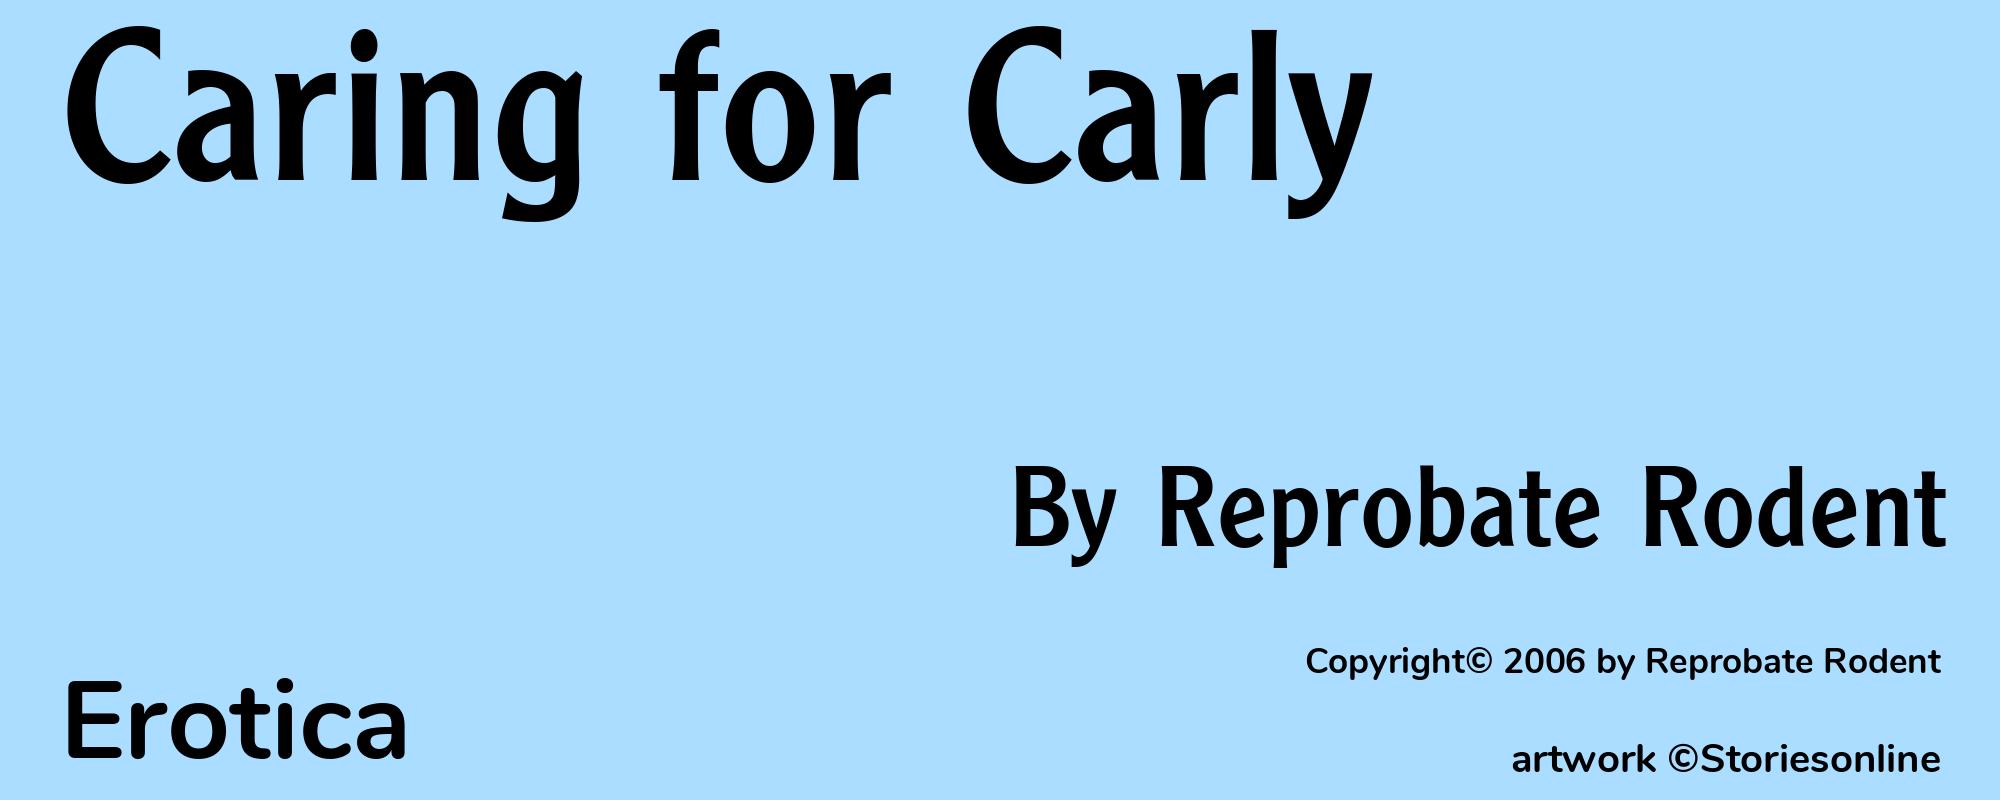 Caring for Carly - Cover